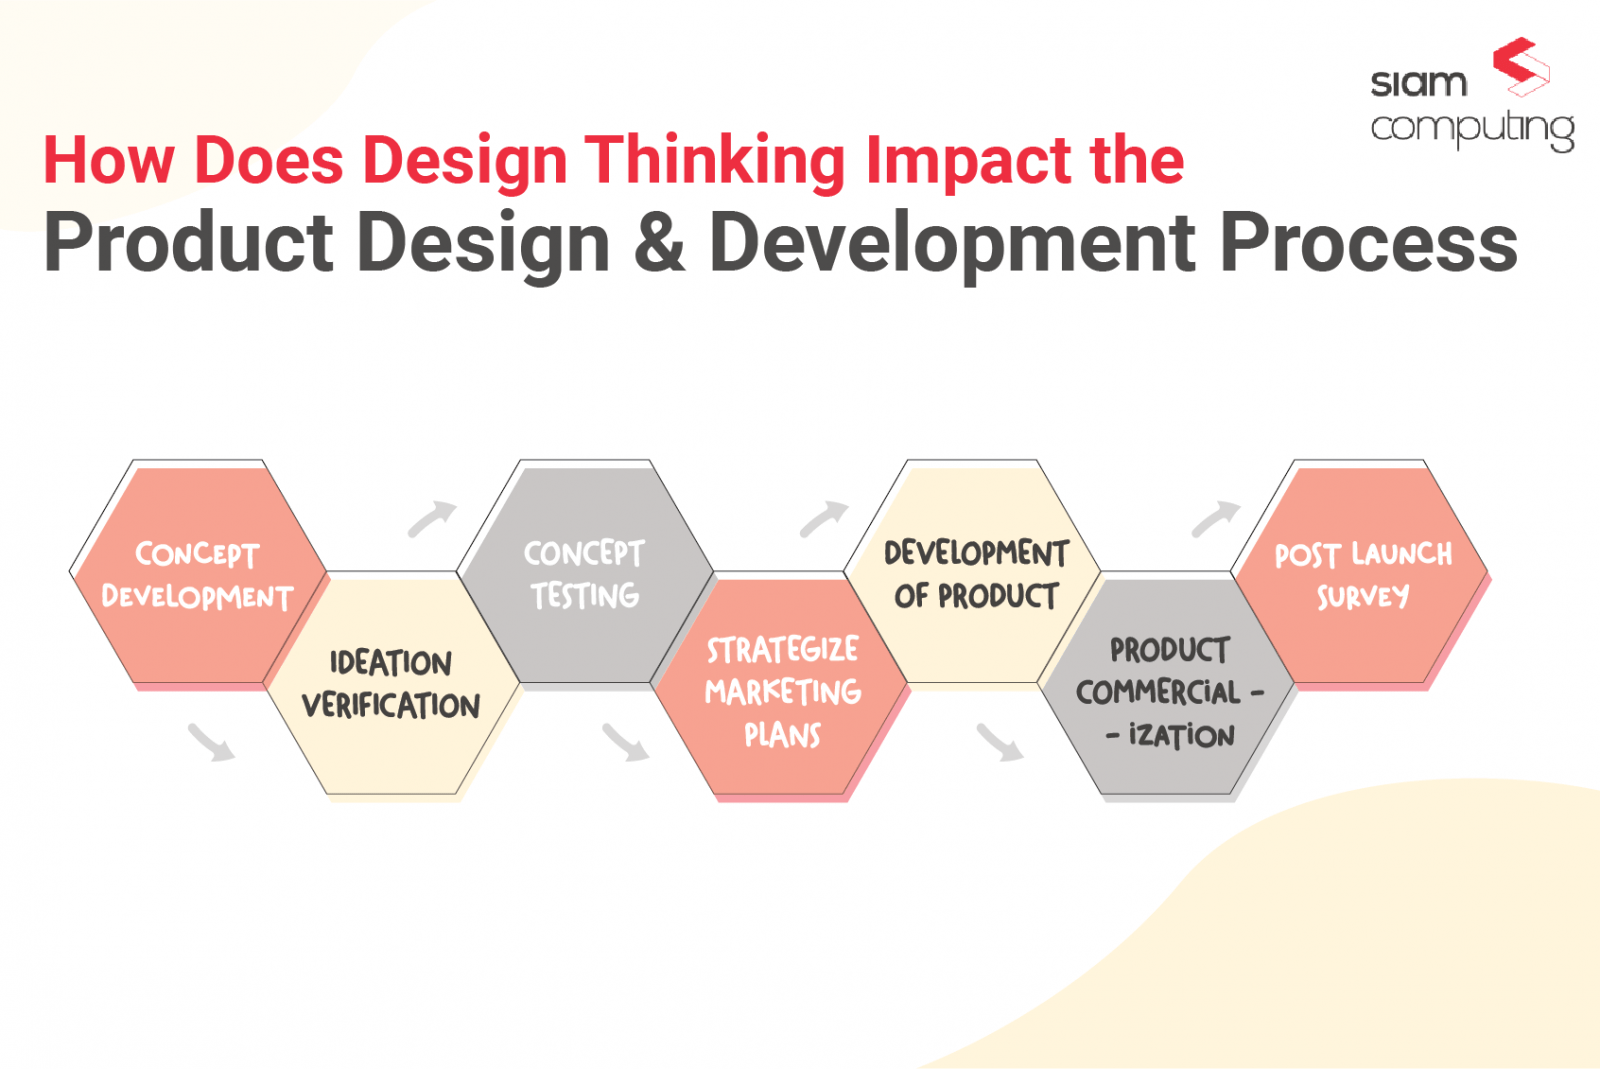 What is Product Design and Development?